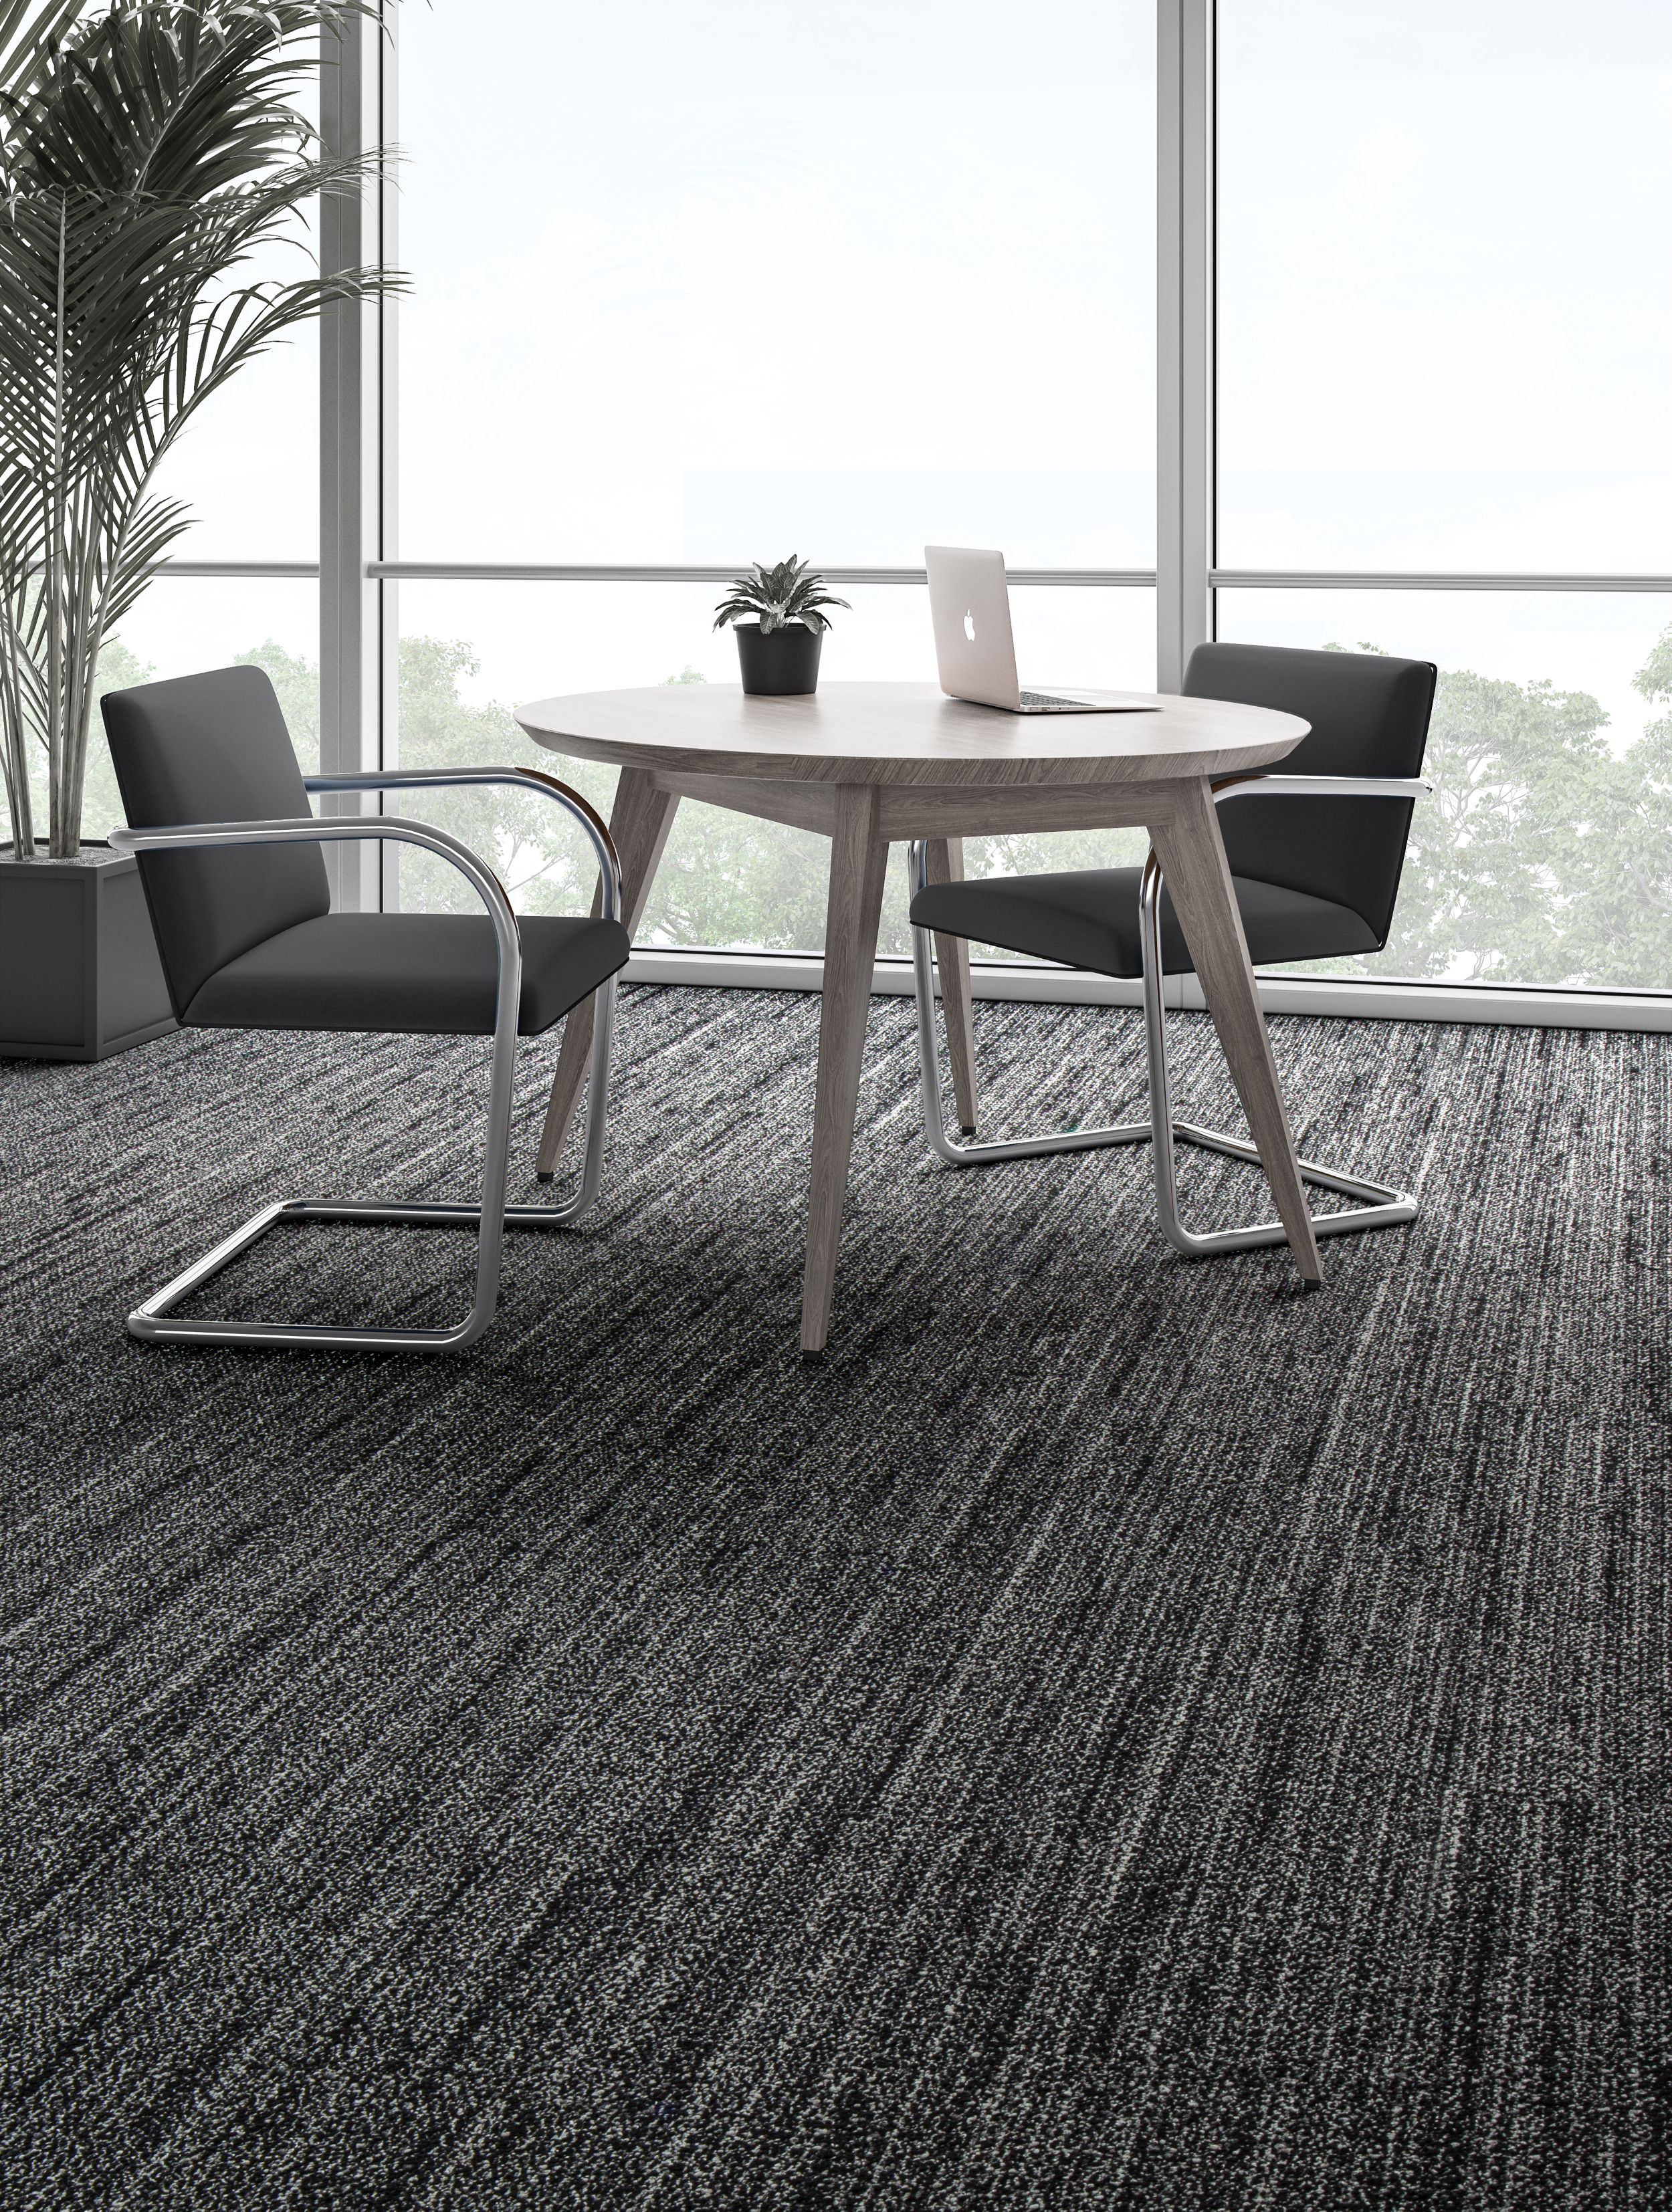 Interface WW870 plank carpet tile shown with small table and chairs numéro d’image 12